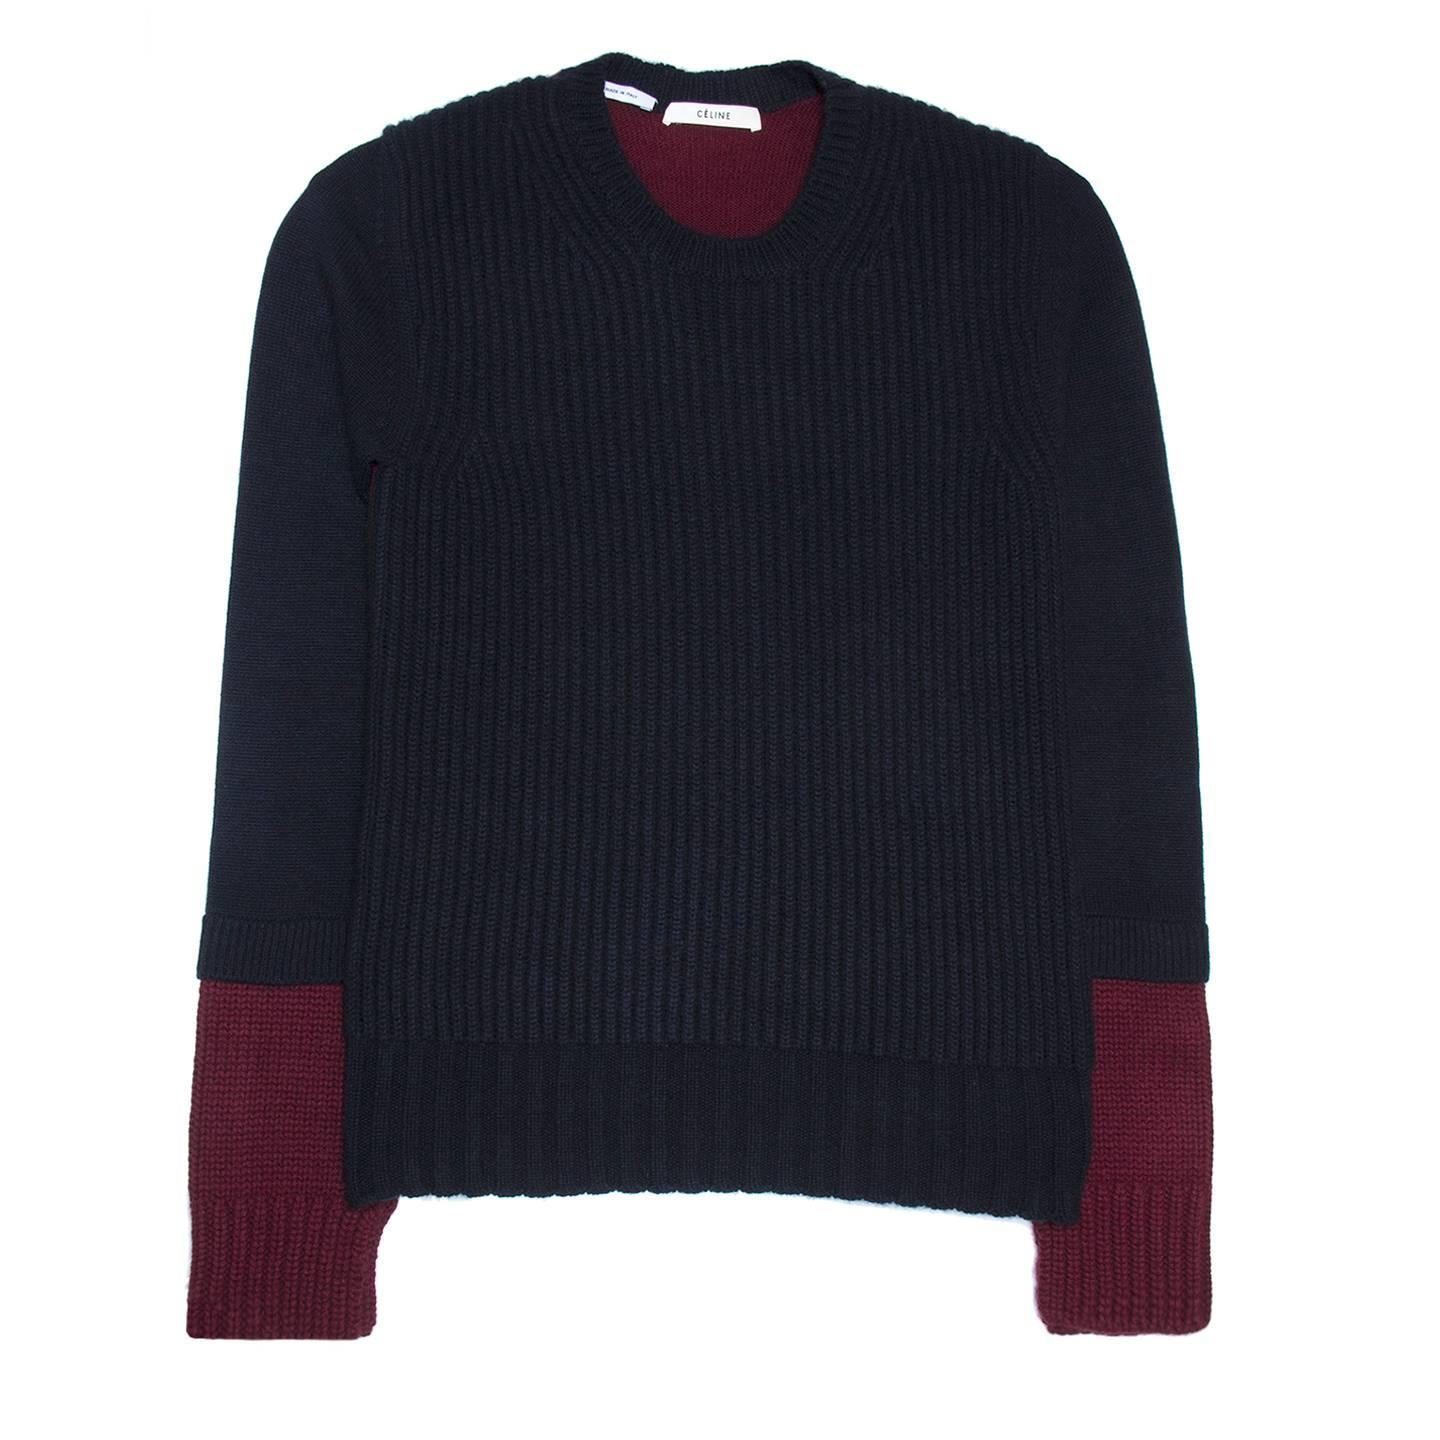 Cashmere crew neck knit pullover with navy blue front and 3/4 sleeves, while back and bottom sleeves part are burgundy. The font and the bottom part of the sleeves are broad knit while the rest of the sweater is fine knit. The burgundy inserts at